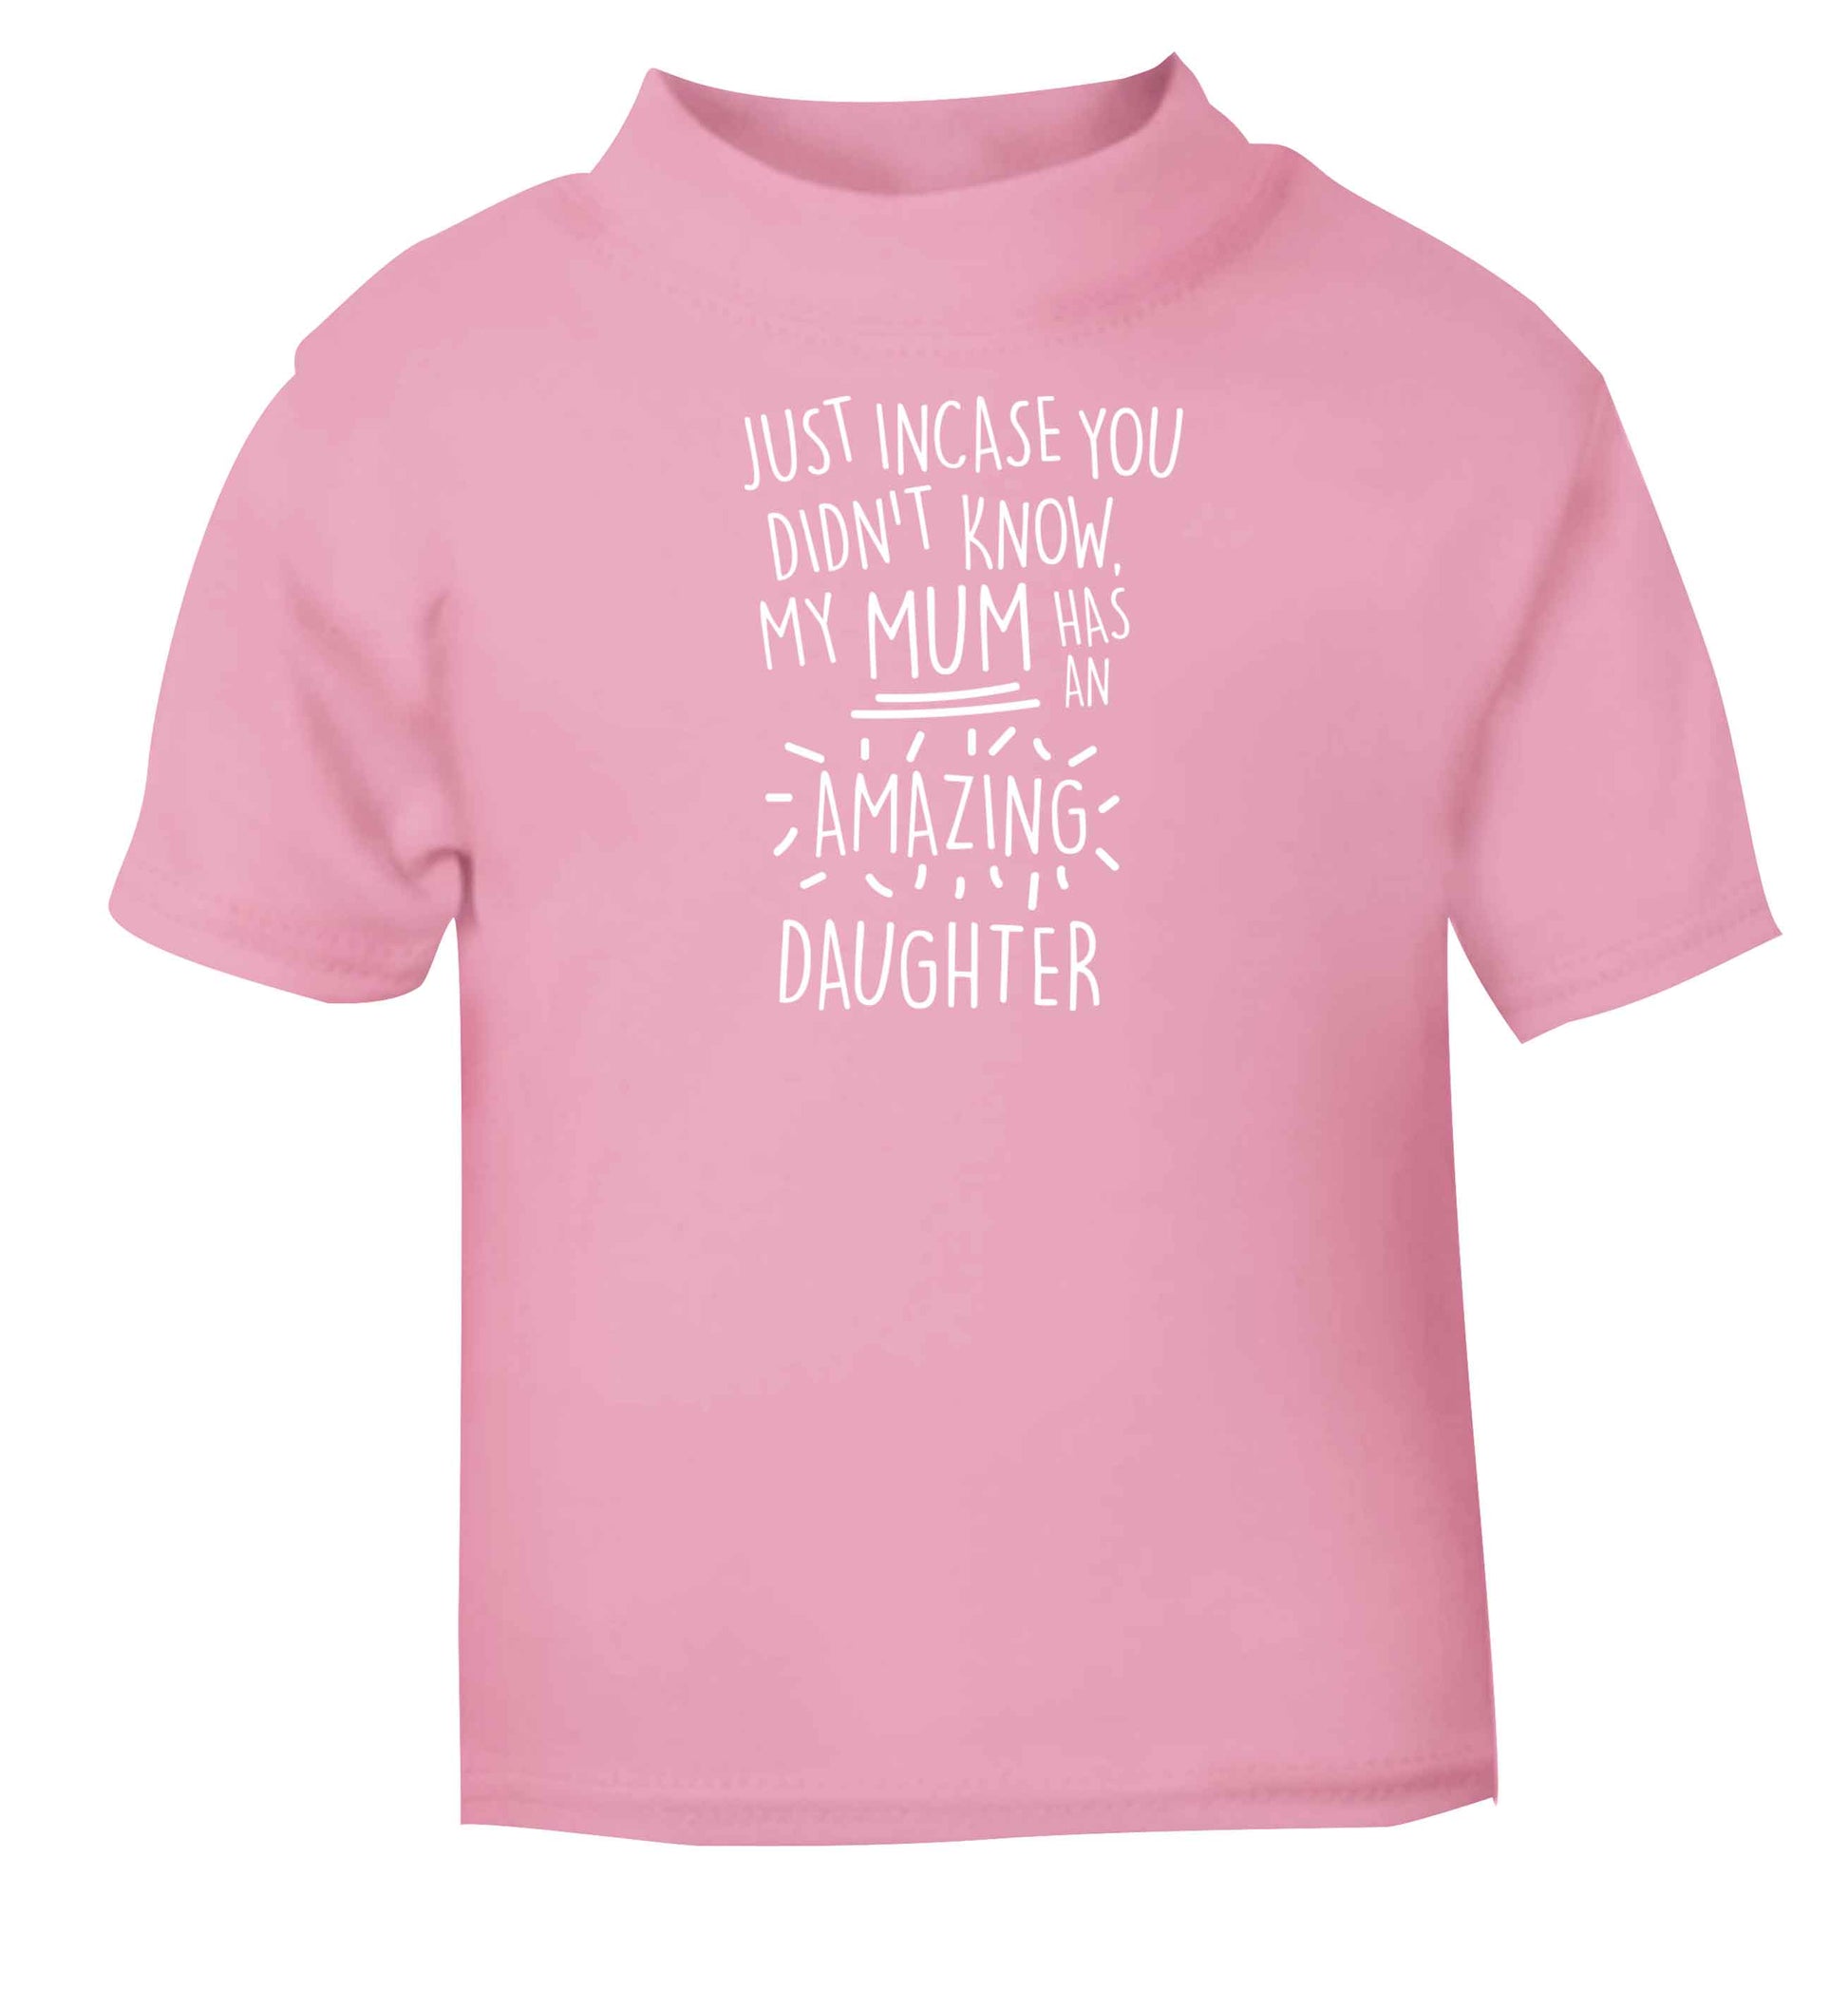 Just incase you didn't know my mum has an amazing daughter Children's light pink Tshirt 12-13 Years